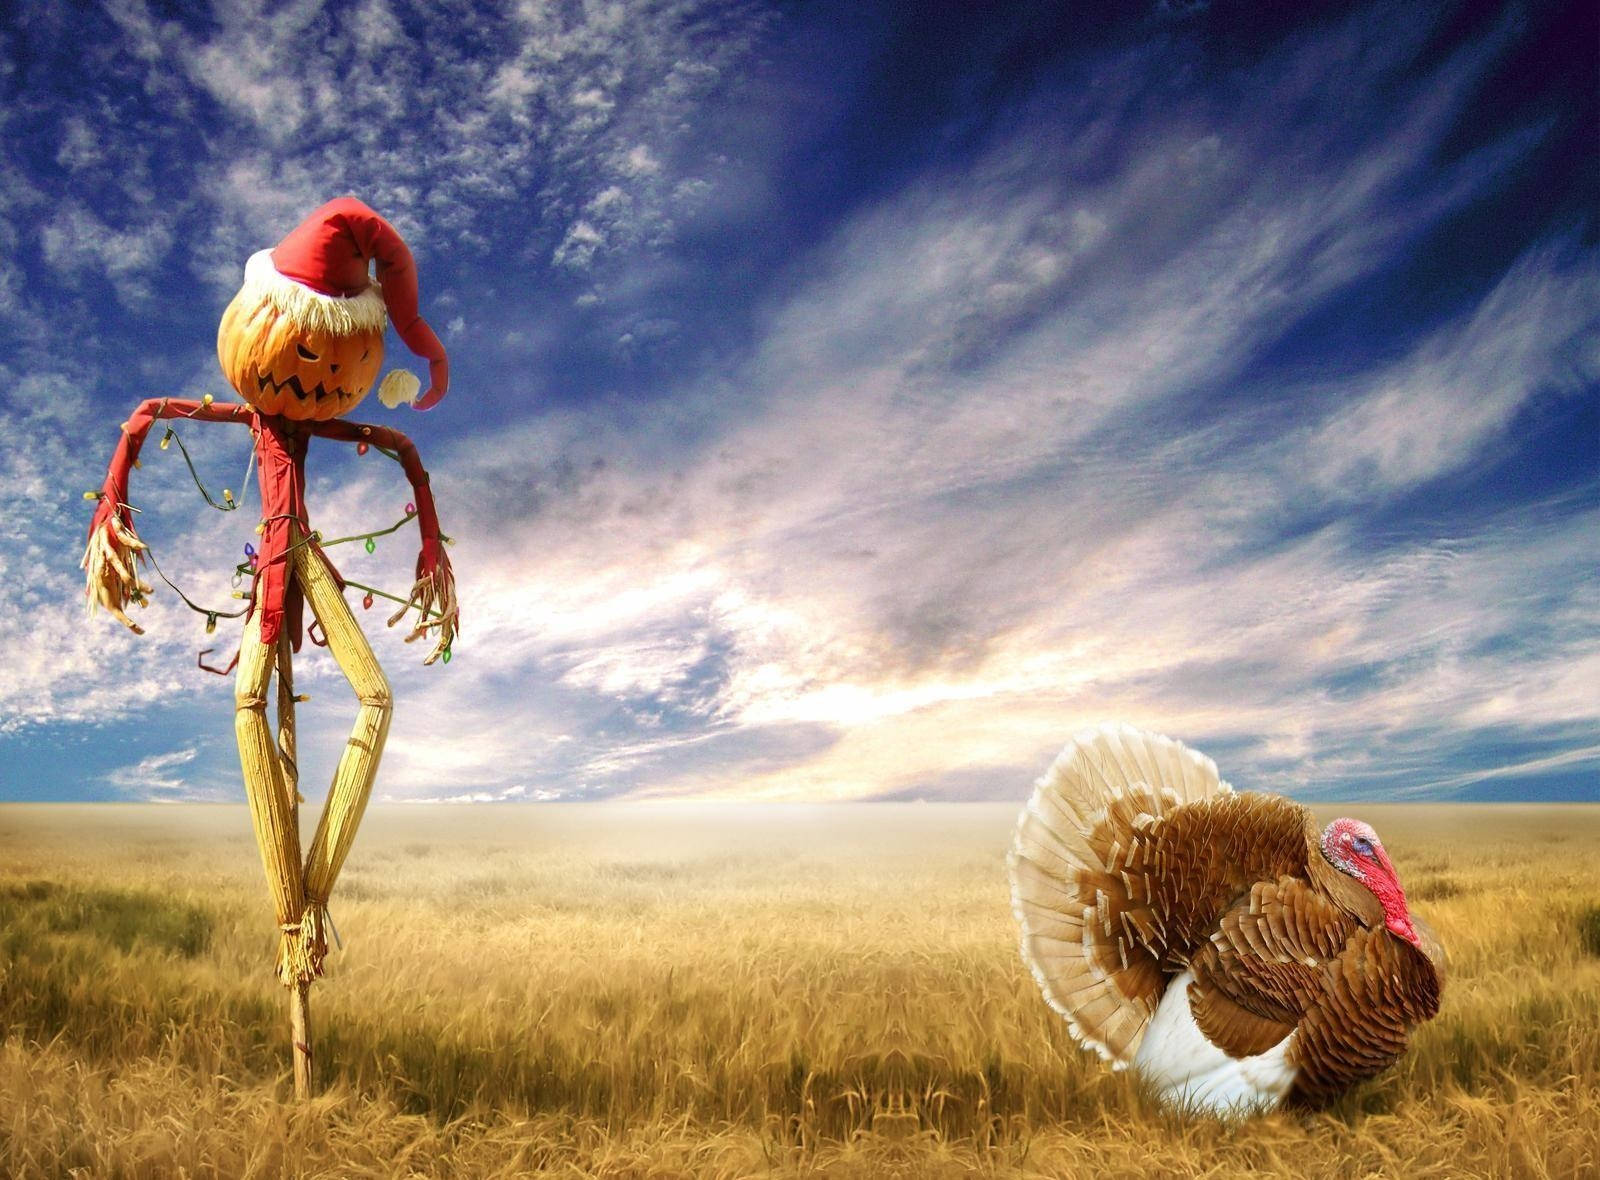 A Turkey And A Scarecrow In A Field Background